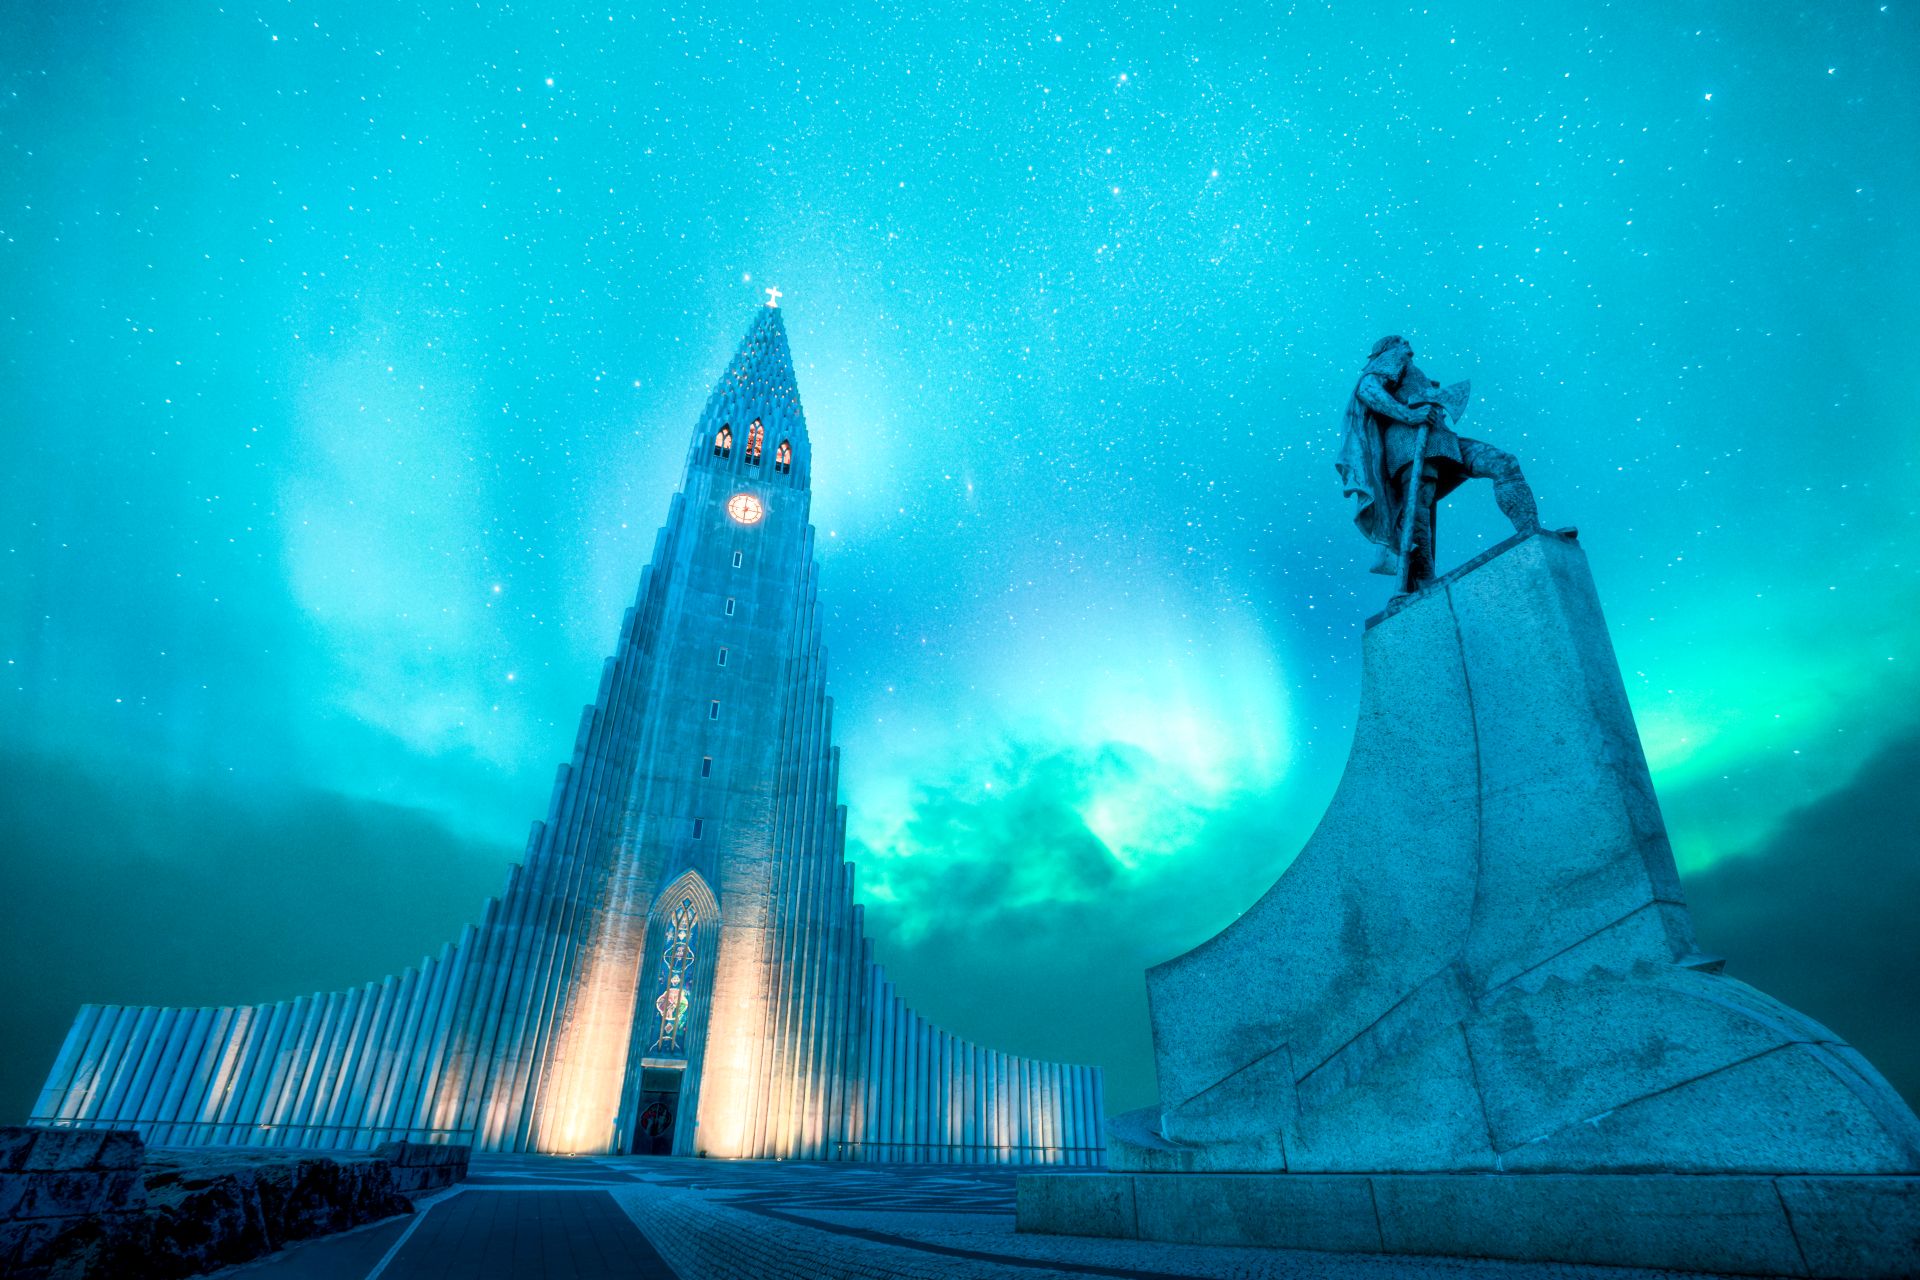 hallgrimskirkja is one of the tallest and most famous Lutheran churches in Reykjavik